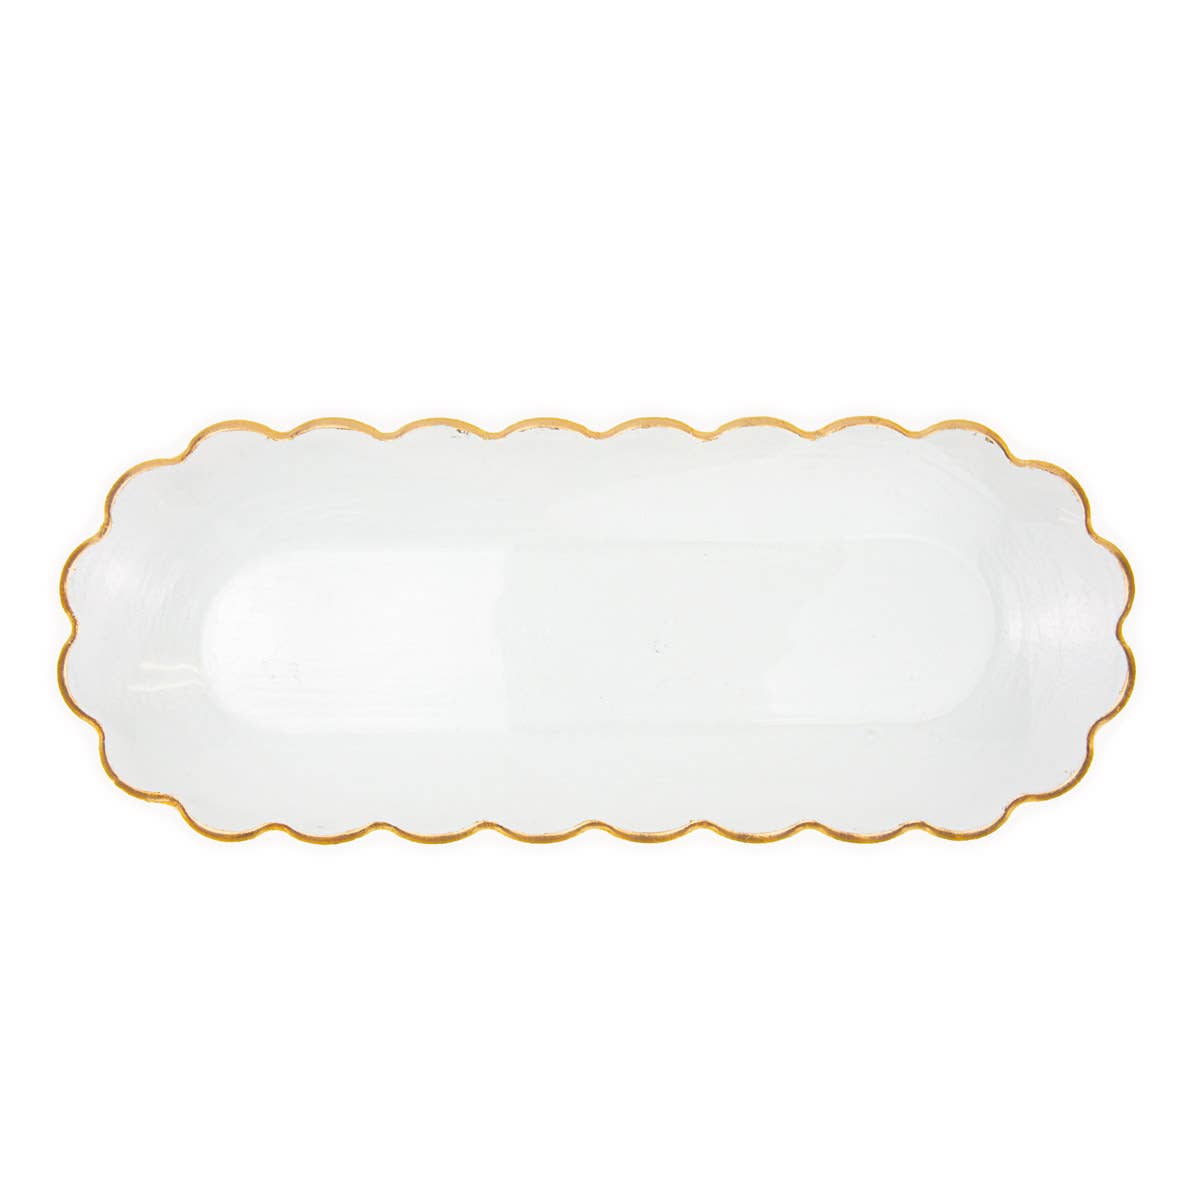 Chapelle Oval Serving Platter   Clear/Gold   17.8x1.2x7